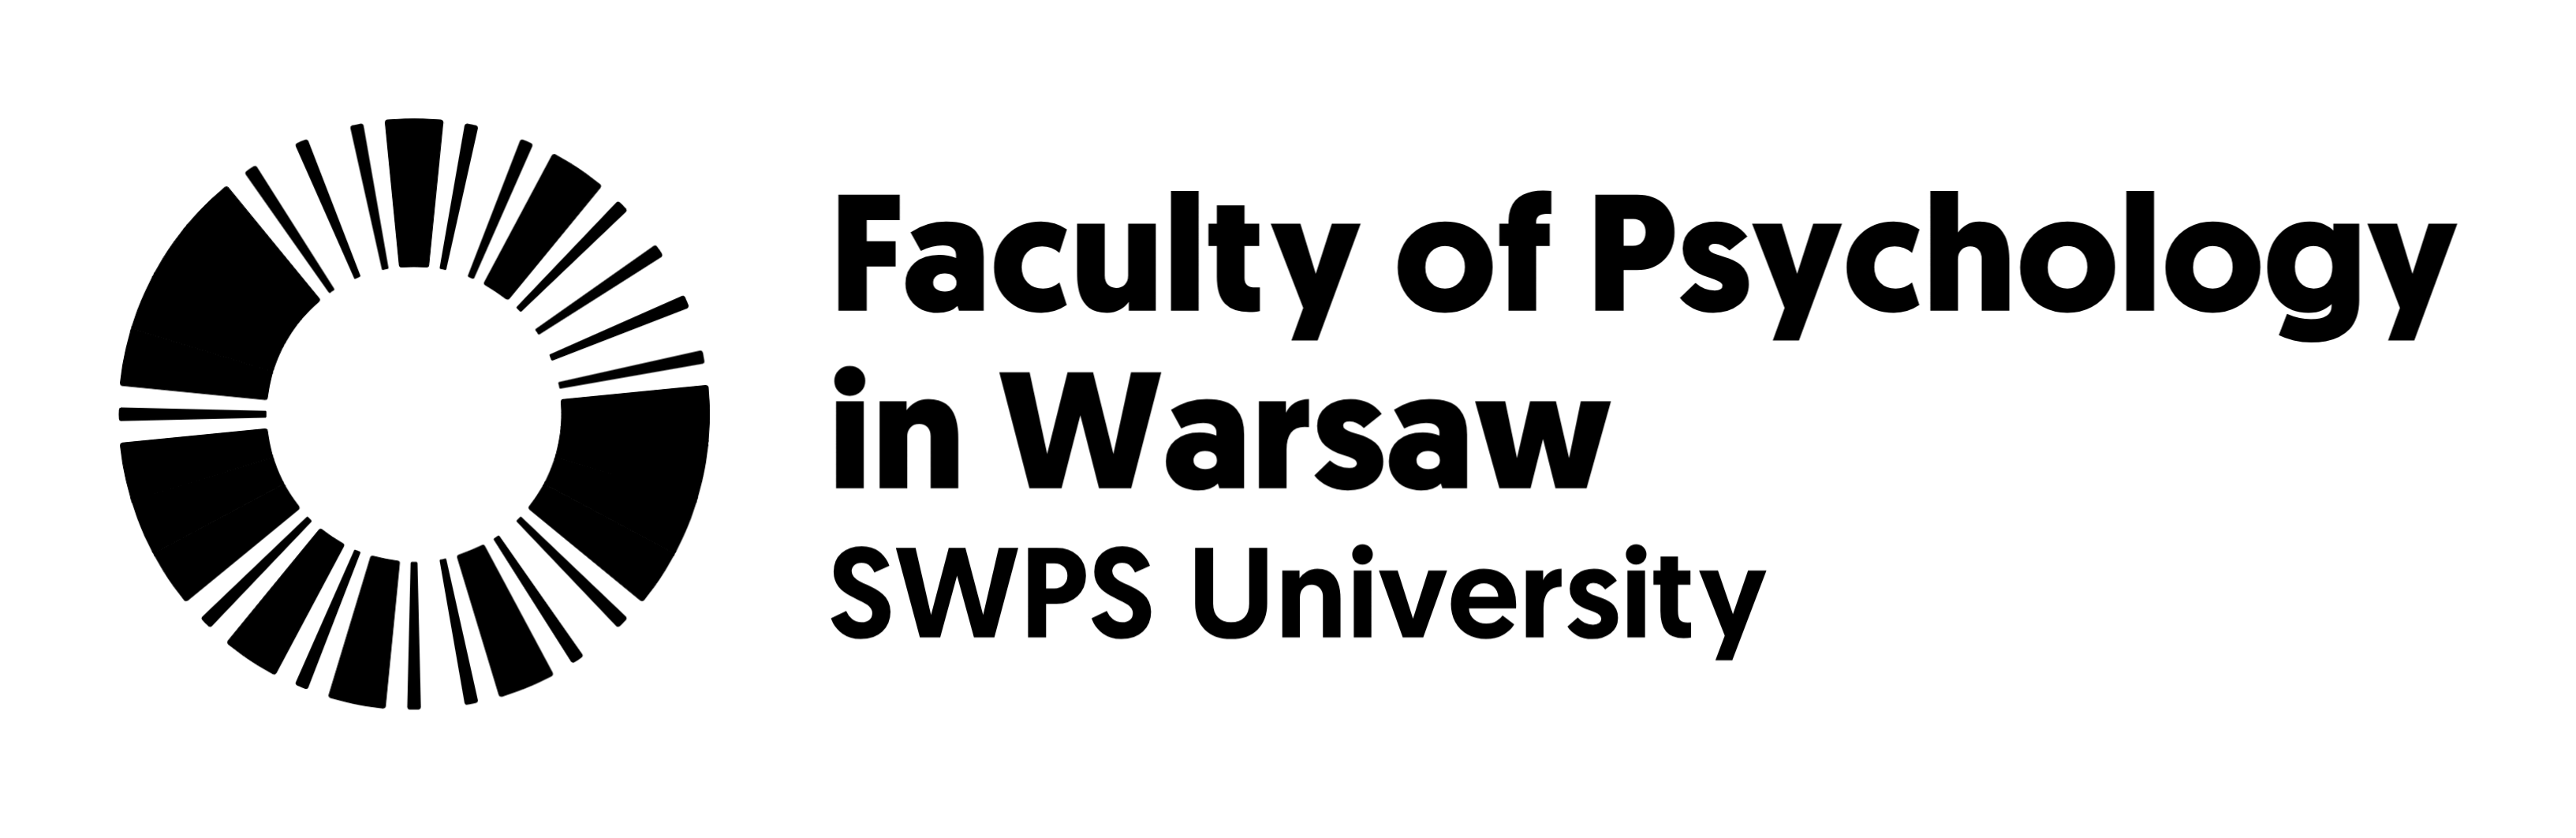 Faculty of Psychology in Warsaw